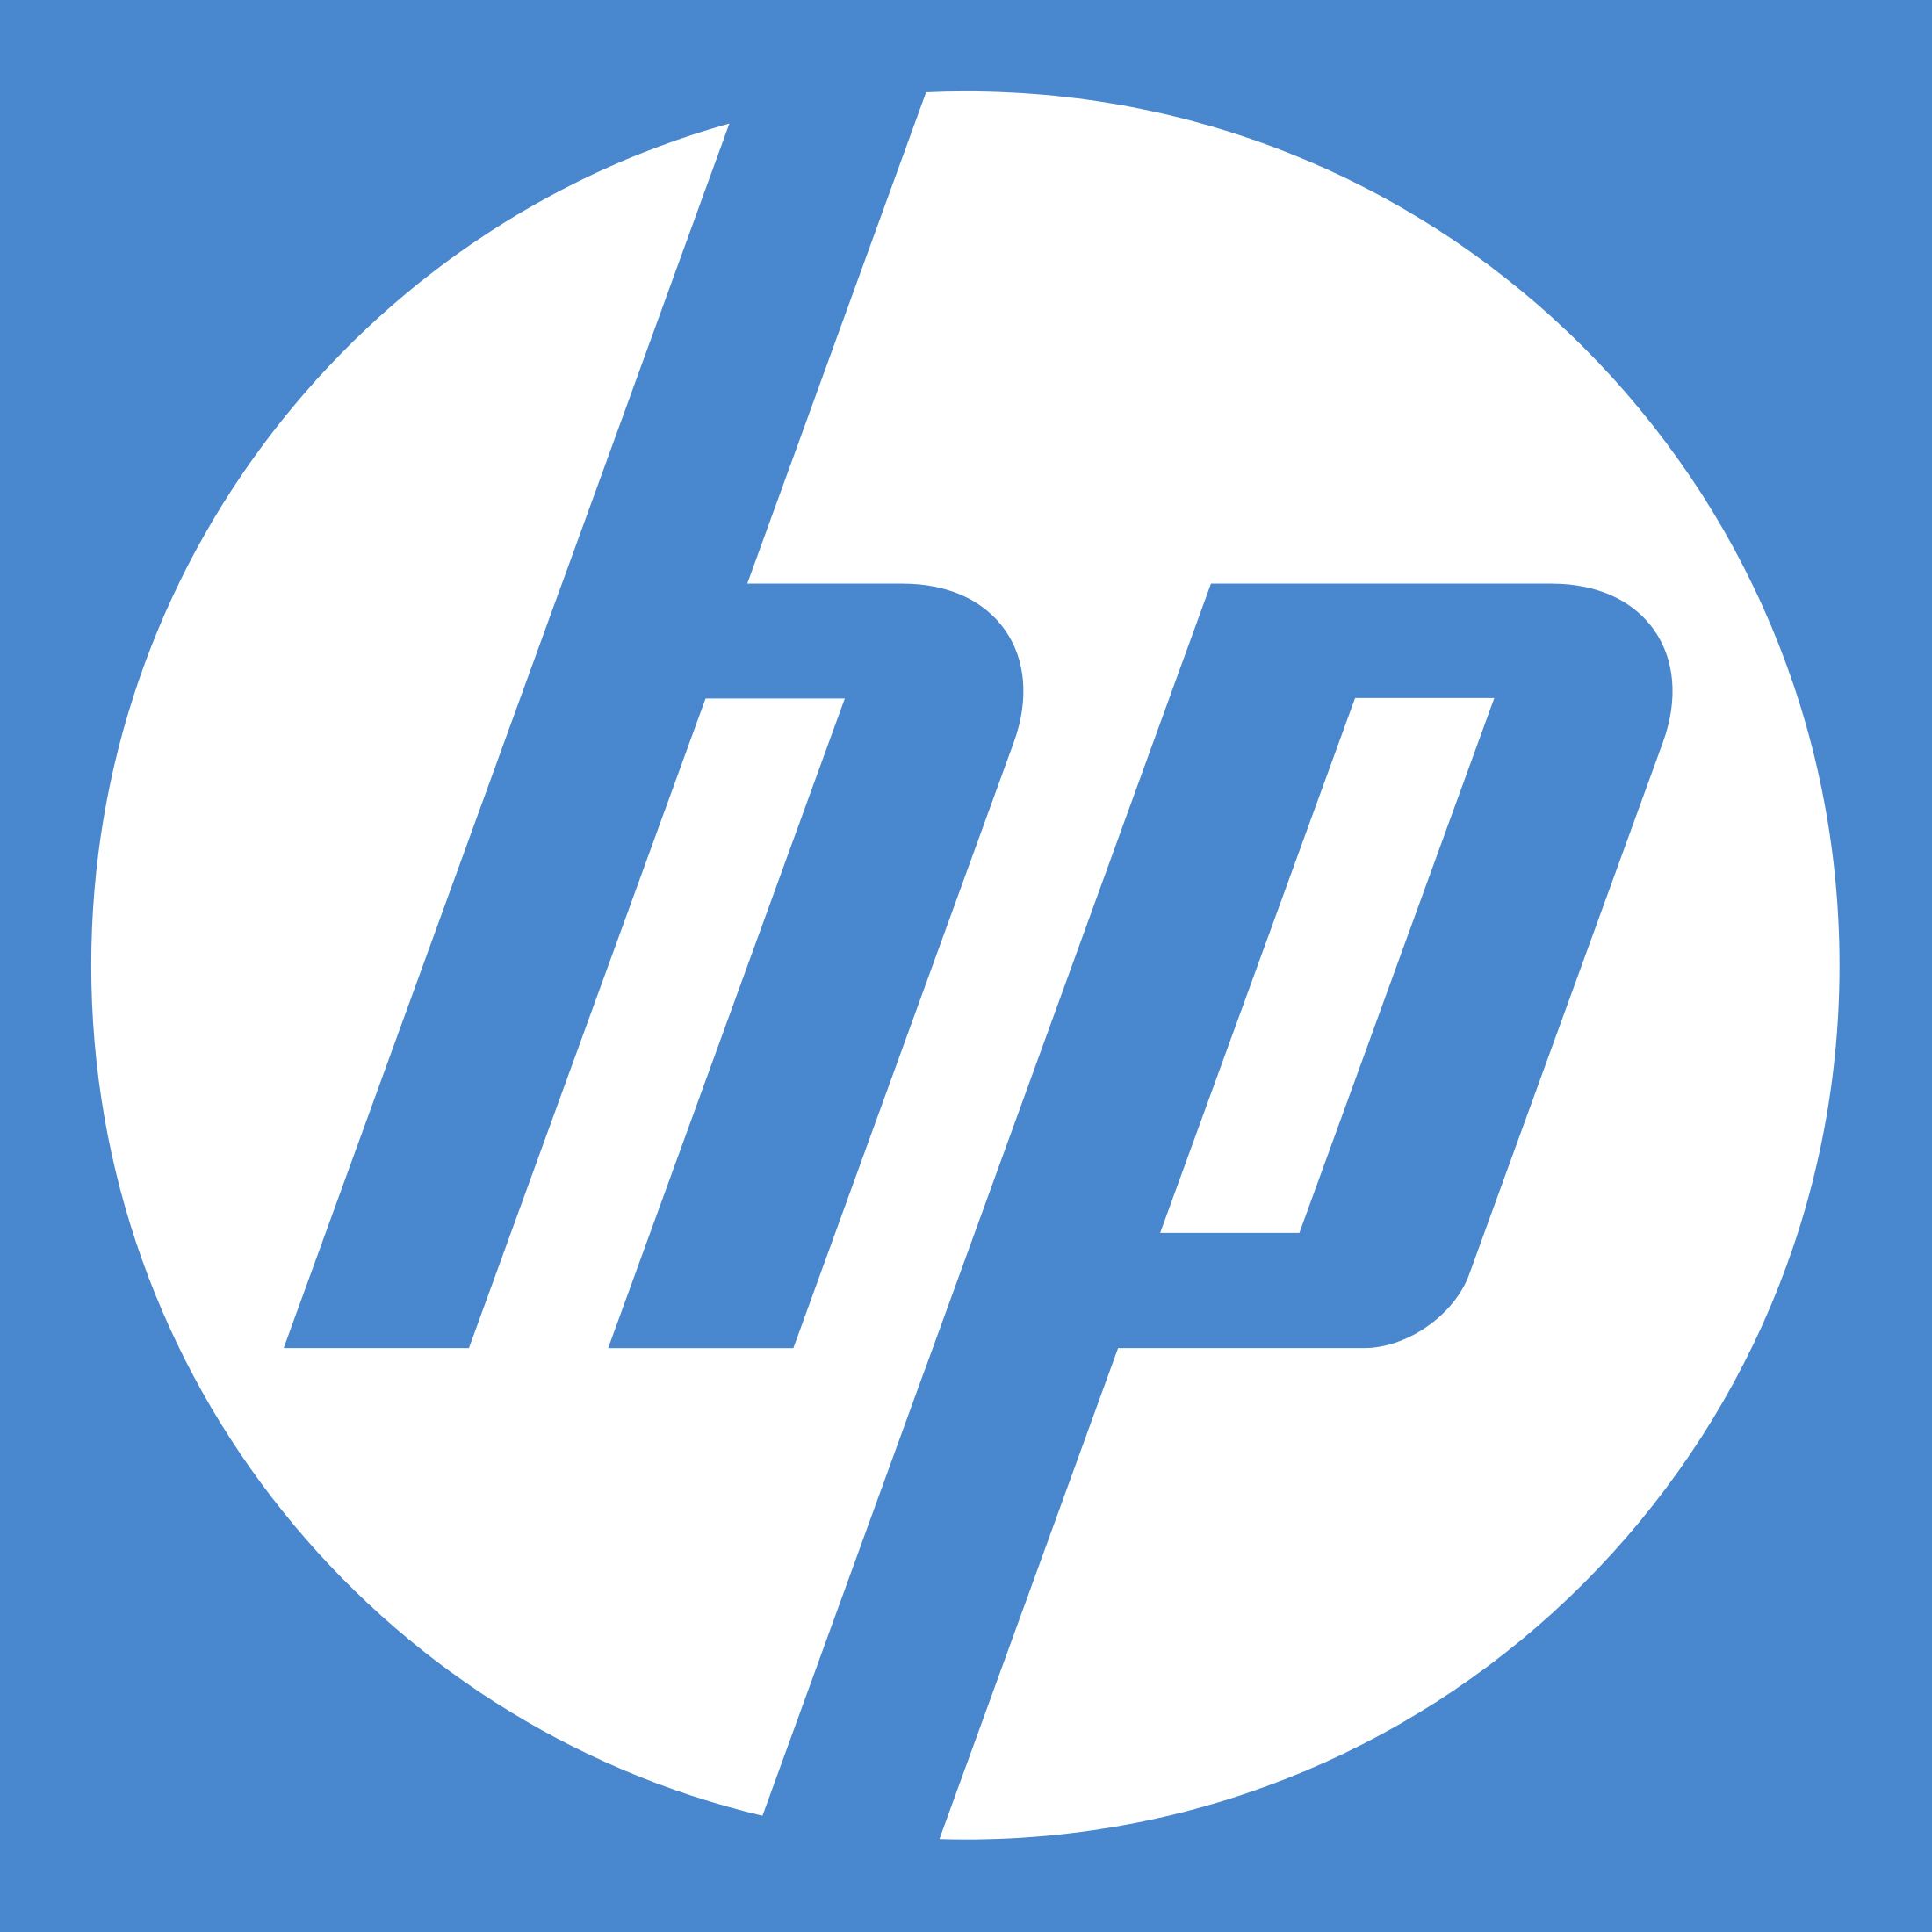 New HP Logo - HP Logo, Hewlett-Packard symbol meaning, history and evolution